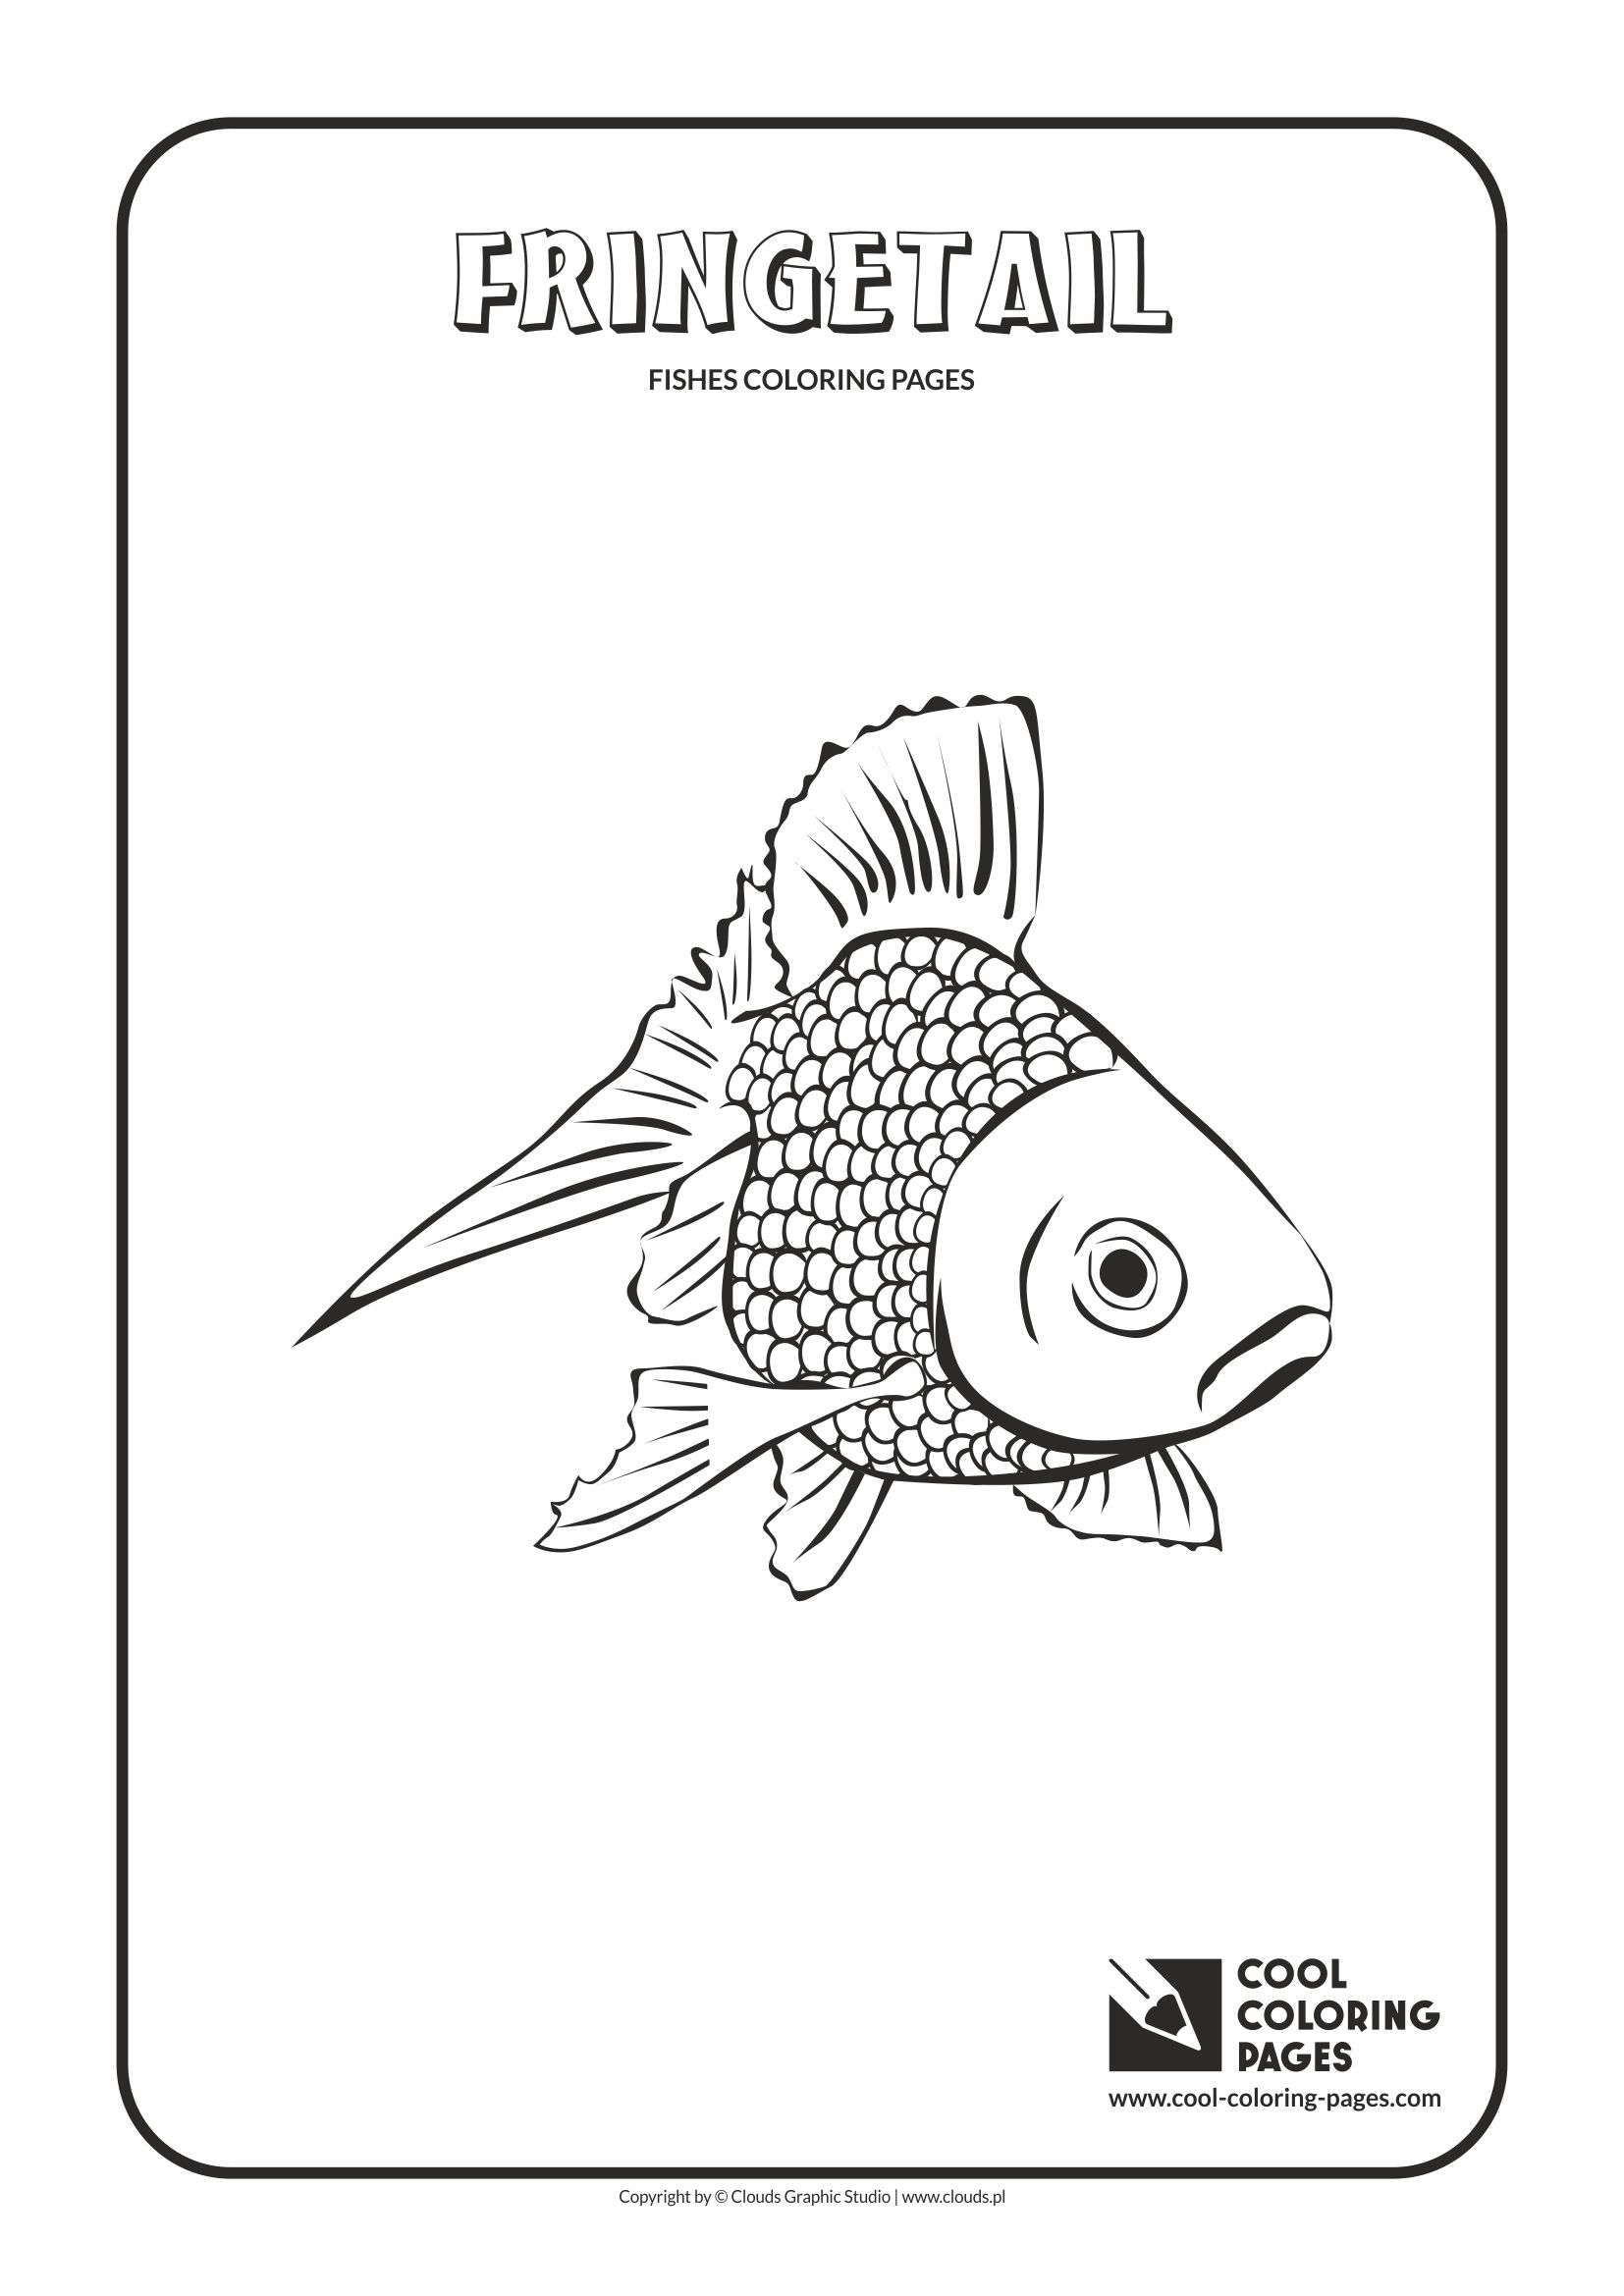 Cool Coloring Pages - Animals / Fringetail / Coloring page with fringetail